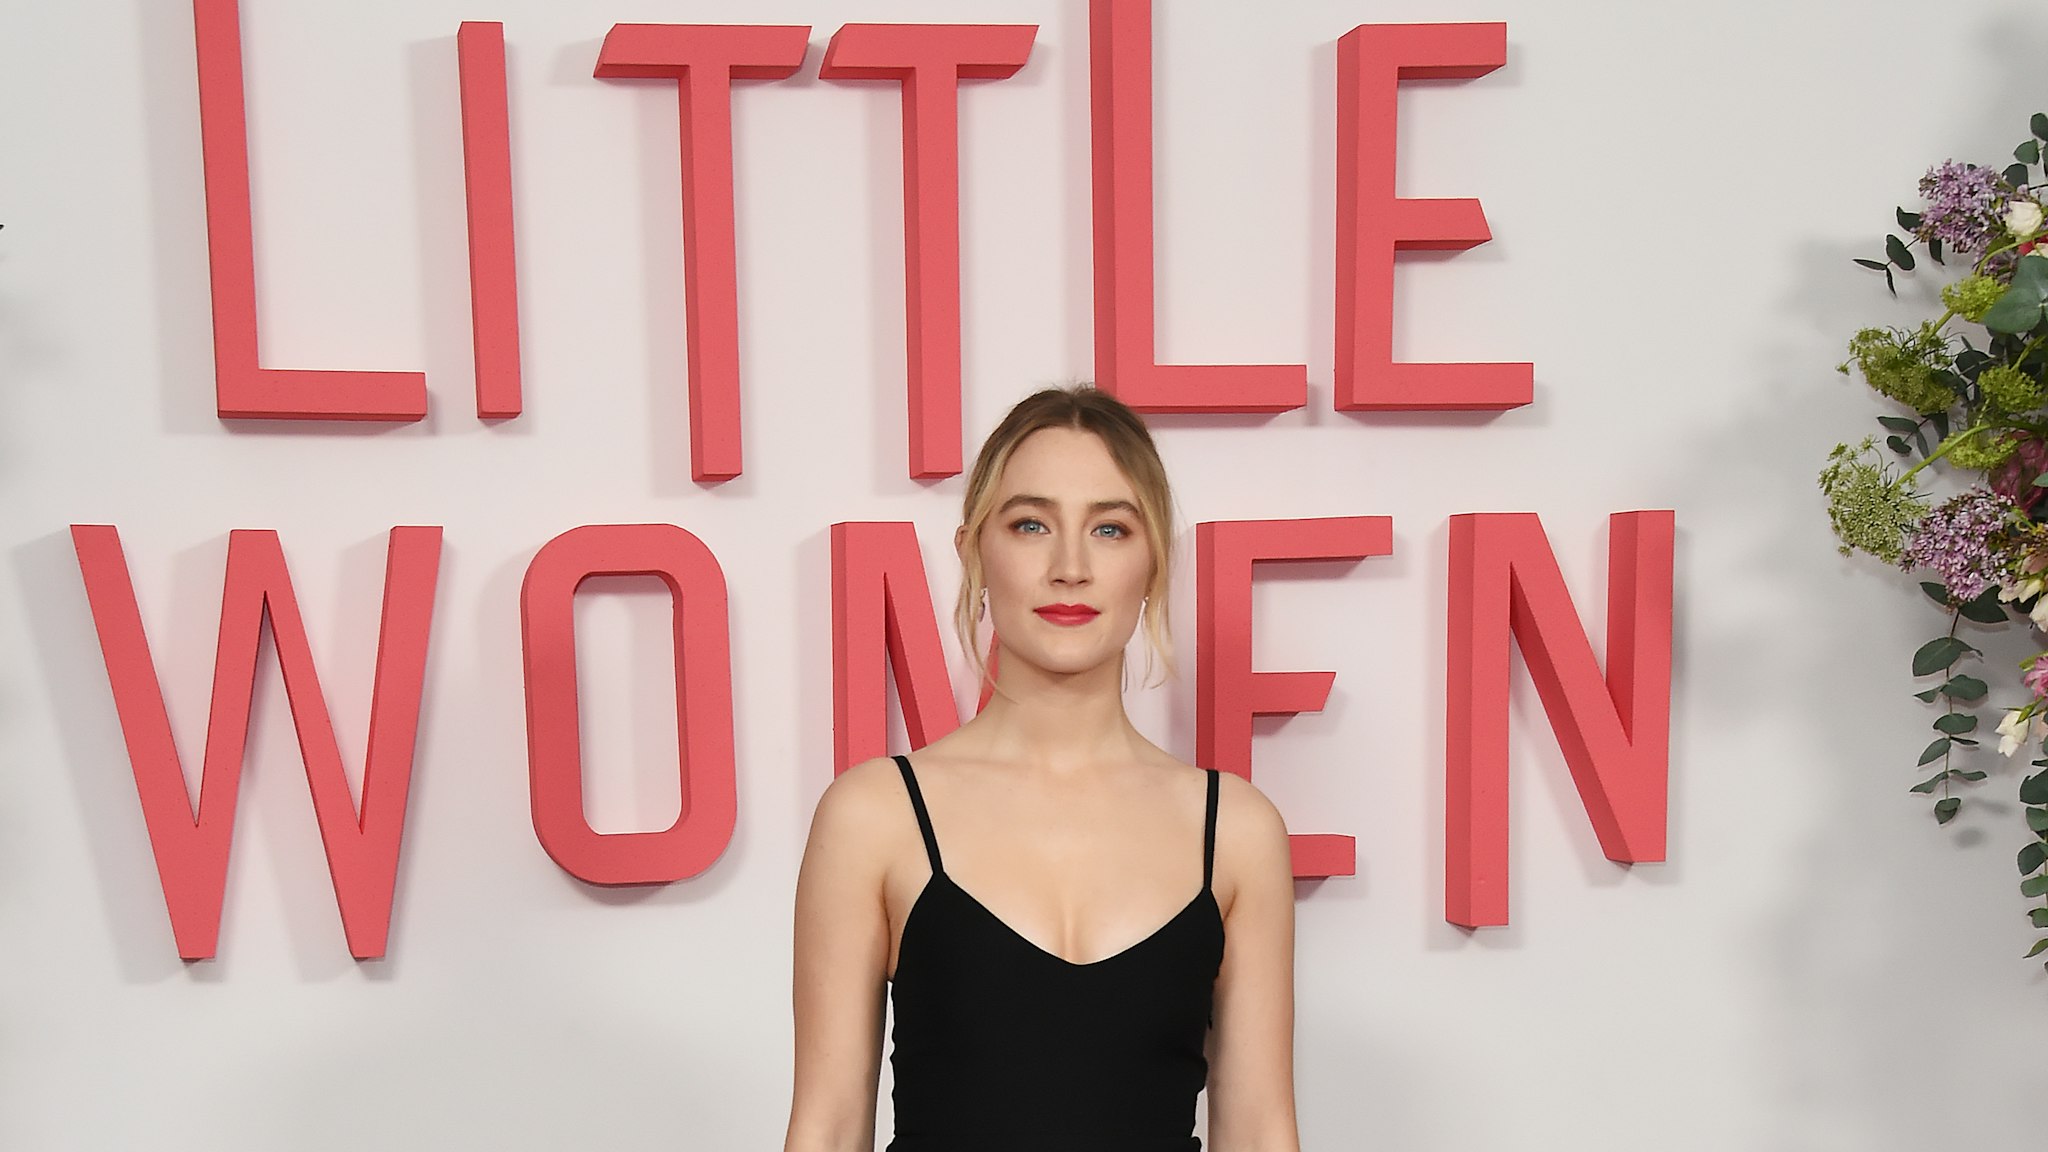 LONDON, ENGLAND - DECEMBER 15: Saoirse Ronan poses at the evening photocall for "Little Women" at The Soho Hotel London on December 16, 2019 in London, England. (Photo by David M. Benett/Dave Benett/WireImage)